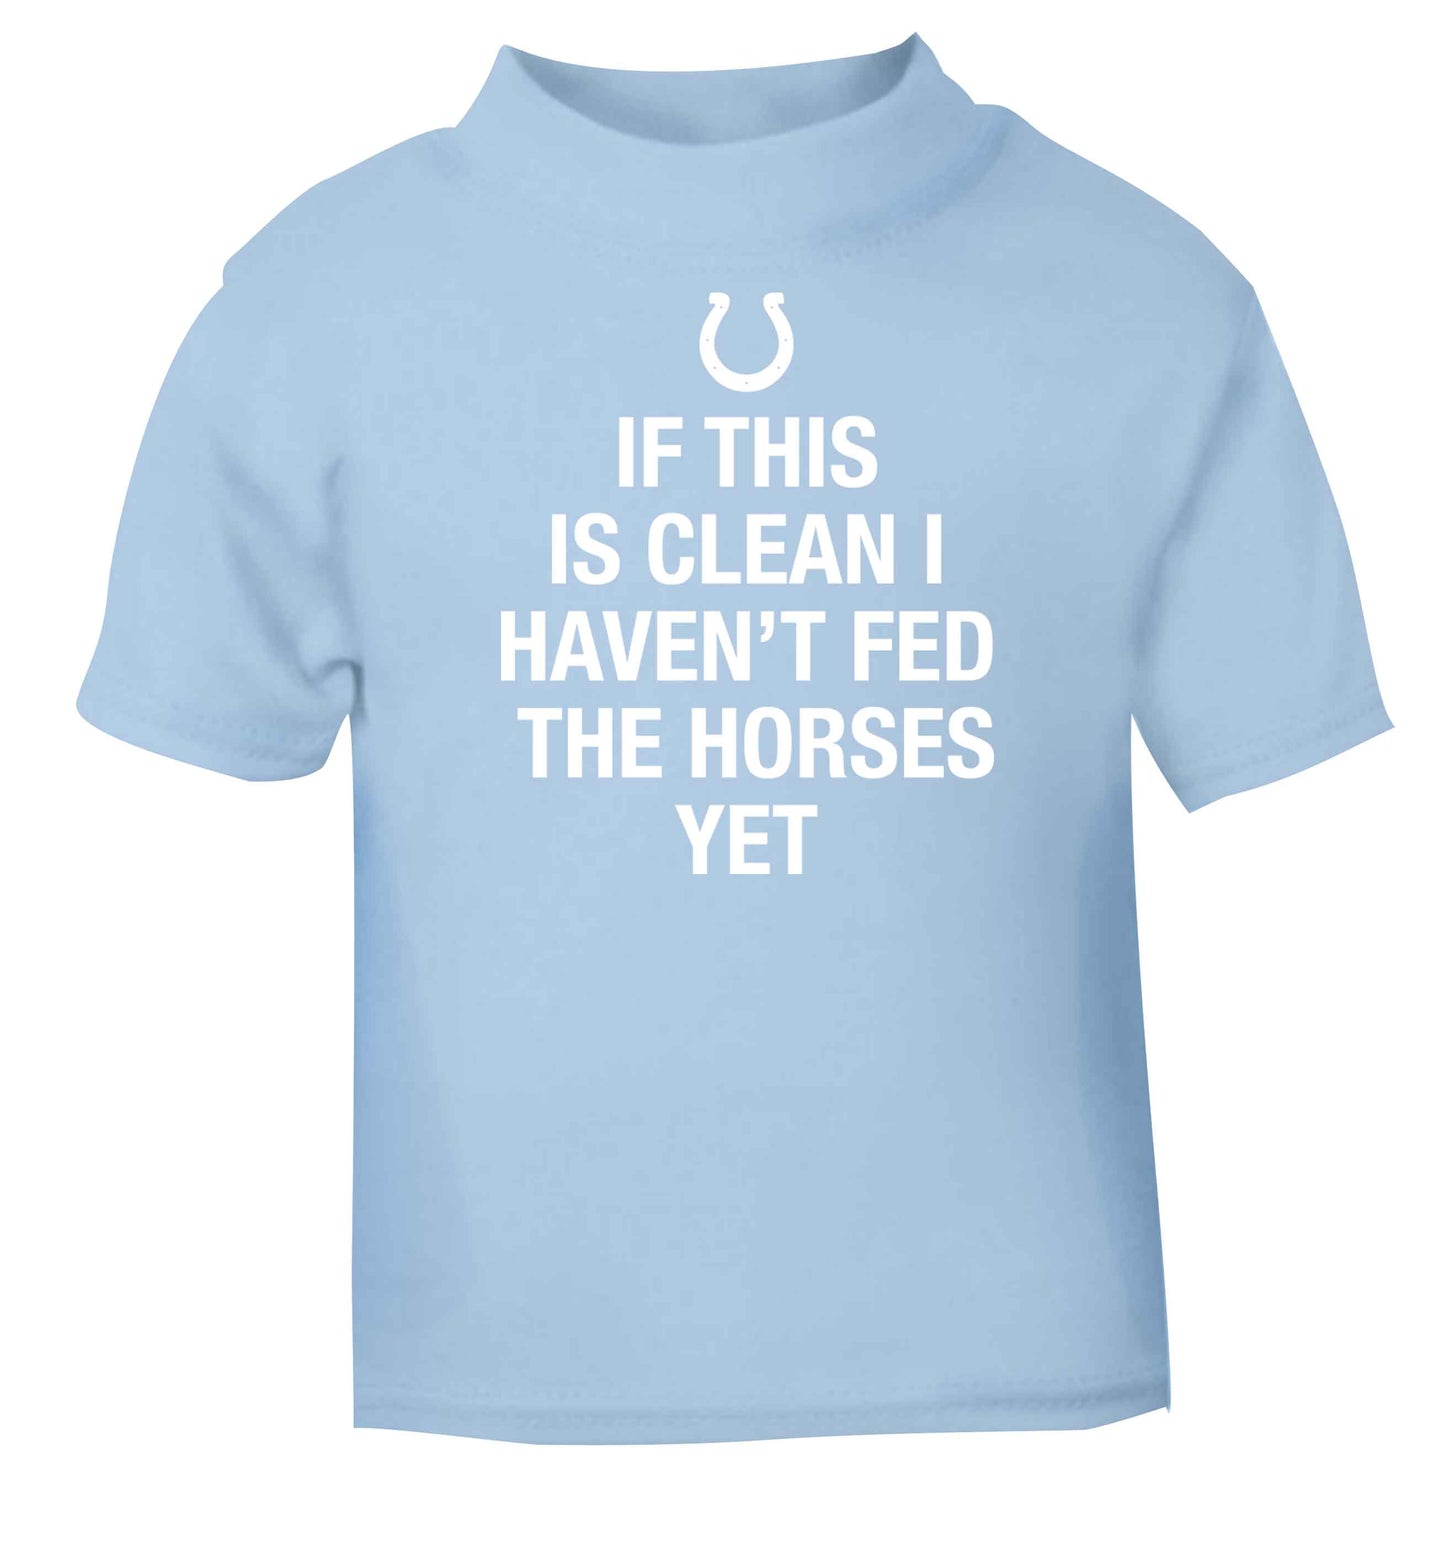 If this isn't clean I haven't fed the horses yet light blue baby toddler Tshirt 2 Years